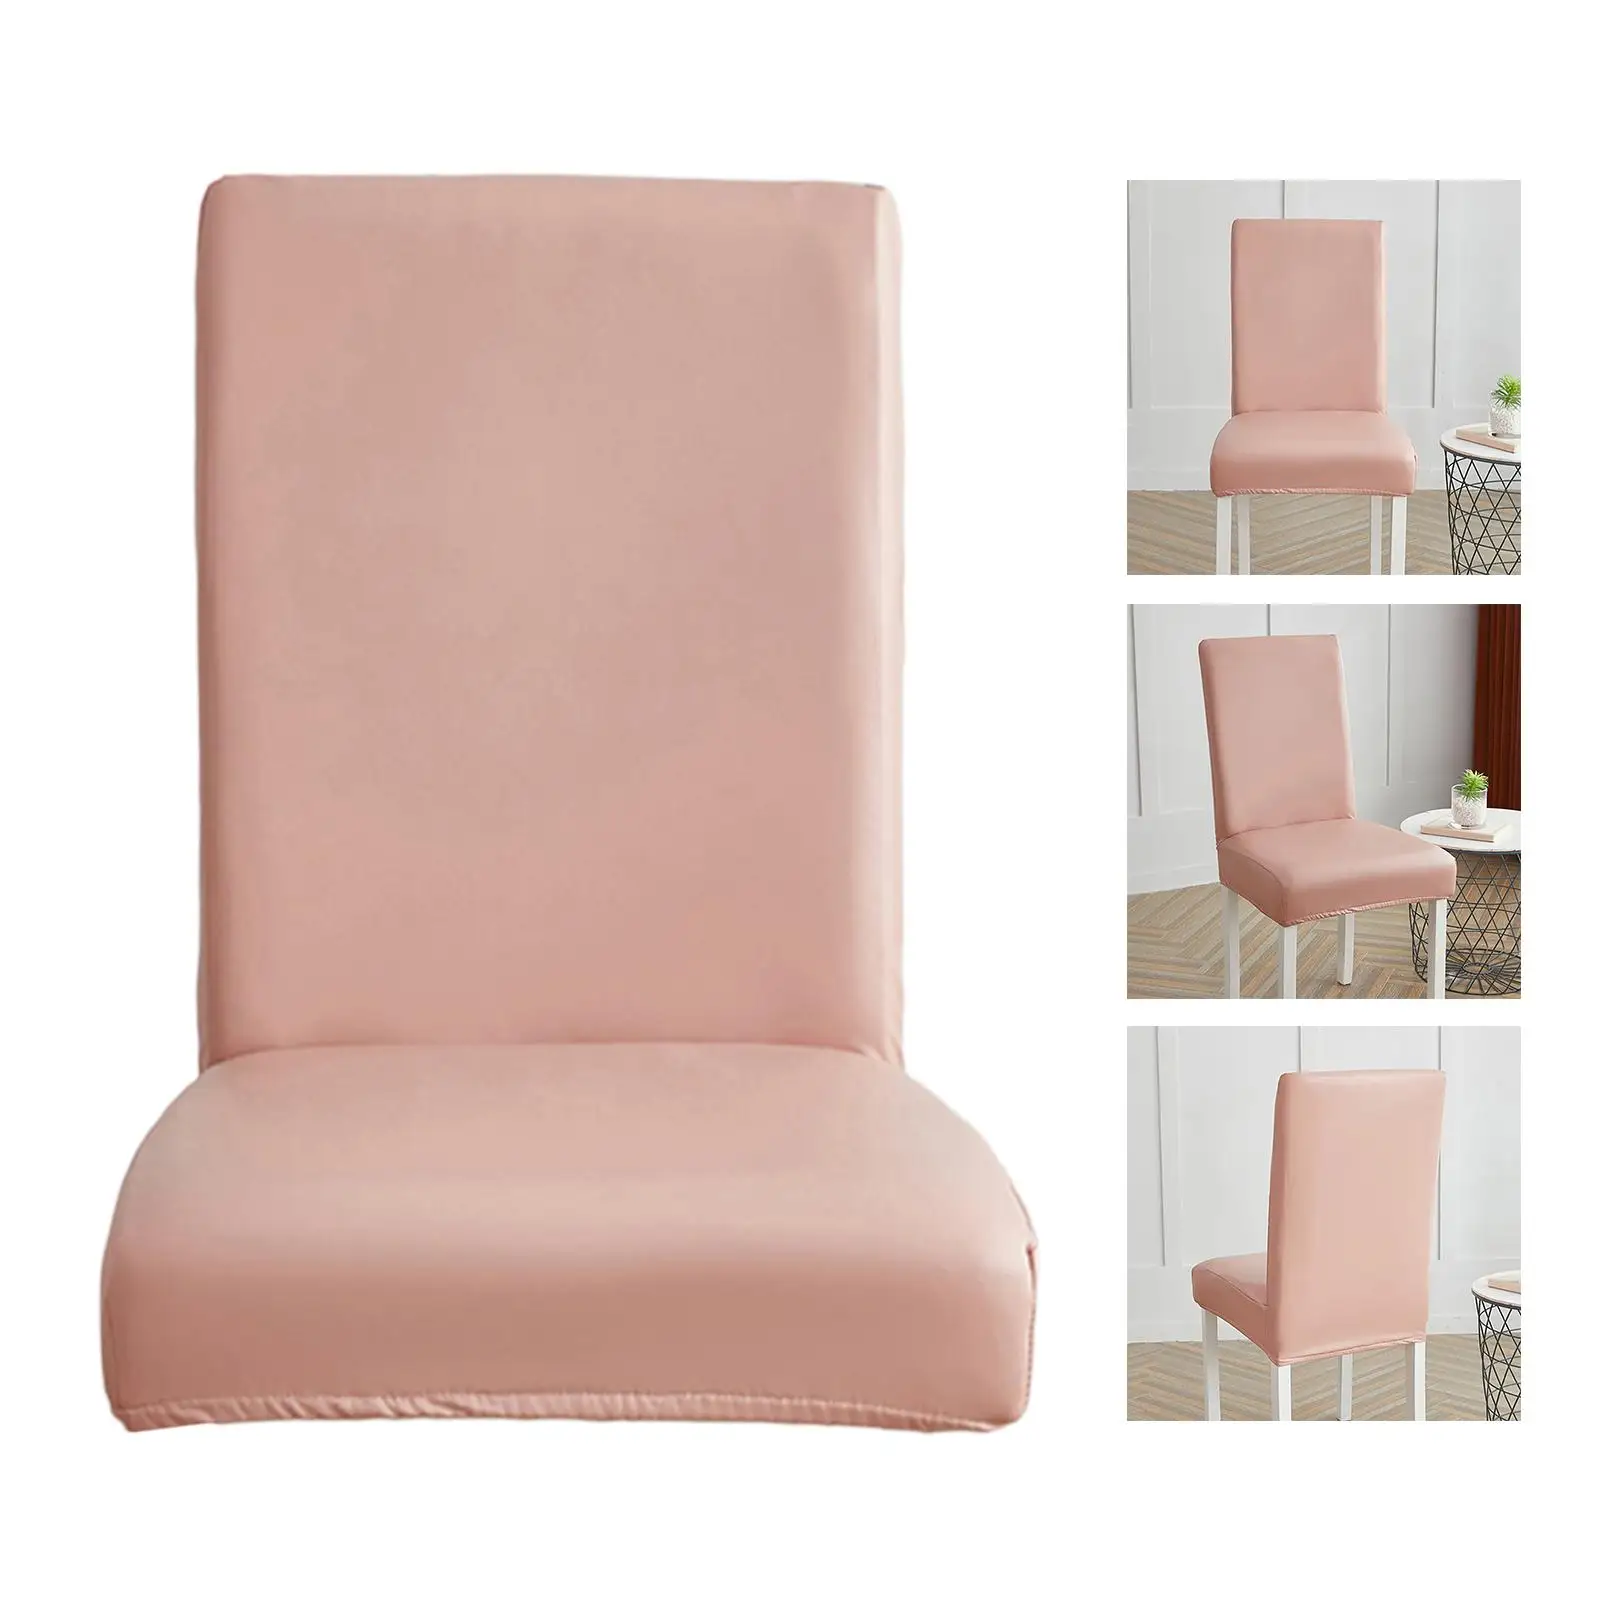 Oilproof Cover, Stretch Cover with Elastic Bottom, Dustproof Removable Seat Cover for Home, Household, Banquet, Dining room